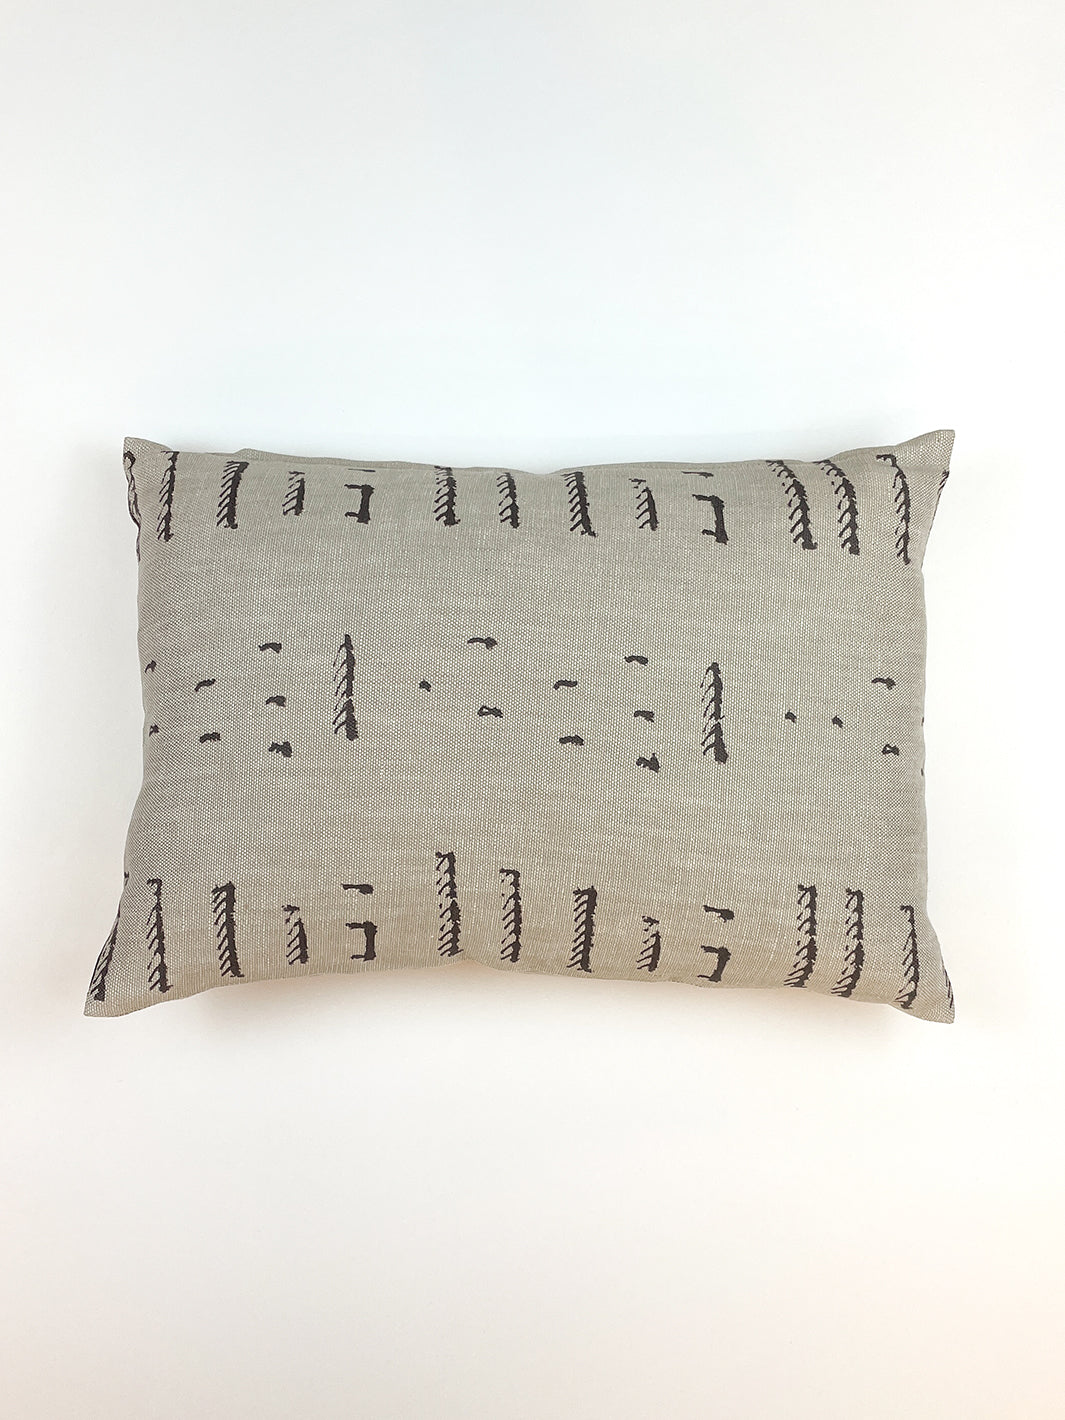 'Stitch' Lumbar Throw Pillow by Nathan Turner - Chocolate on Flax Linen